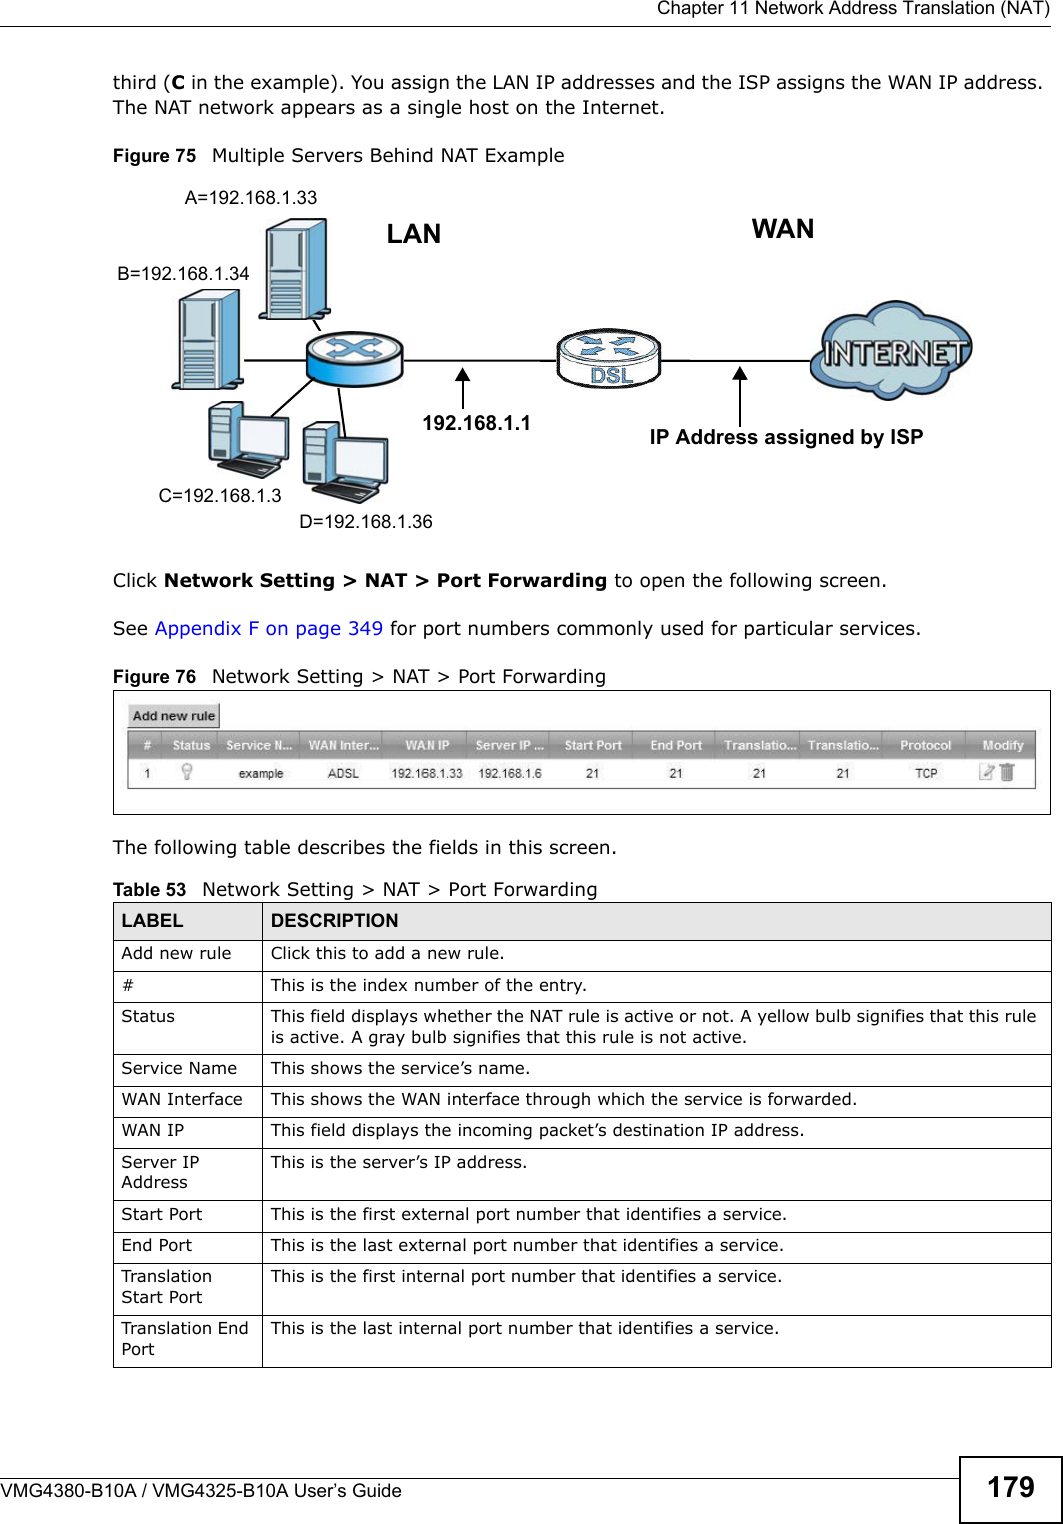  Chapter 11 Network Address Translation (NAT)VMG4380-B10A / VMG4325-B10A User’s Guide 179third (C in the example). You assign the LAN IP addresses and the ISP assigns the WAN IP address. The NAT network appears as a single host on the Internet.Figure 75   Multiple Servers Behind NAT ExampleClick Network Setting &gt; NAT &gt; Port Forwarding to open the following screen.See Appendix F on page 349 for port numbers commonly used for particular services. Figure 76   Network Setting &gt; NAT &gt; Port ForwardingThe following table describes the fields in this screen. Table 53   Network Setting &gt; NAT &gt; Port ForwardingLABEL DESCRIPTIONAdd new rule Click this to add a new rule.# This is the index number of the entry.Status This field displays whether the NAT rule is active or not. A yellow bulb signifies that this ruleis active. A gray bulb signifies that this rule is not active.Service Name This shows the service’s name.WAN Interface This shows the WAN interface through which the service is forwarded.WAN IP This field displays the incoming packet’s destination IP address.Server IP AddressThis is the server’s IP address.Start Port This is the first external port number that identifies a service.End Port This is the last external port number that identifies a service.TranslationStart PortThis is the first internal port number that identifies a service.Translation EndPortThis is the last internal port number that identifies a service.A=192.168.1.33D=192.168.1.36C=192.168.1.3B=192.168.1.34WANLAN192.168.1.1 IP Address assigned by ISP